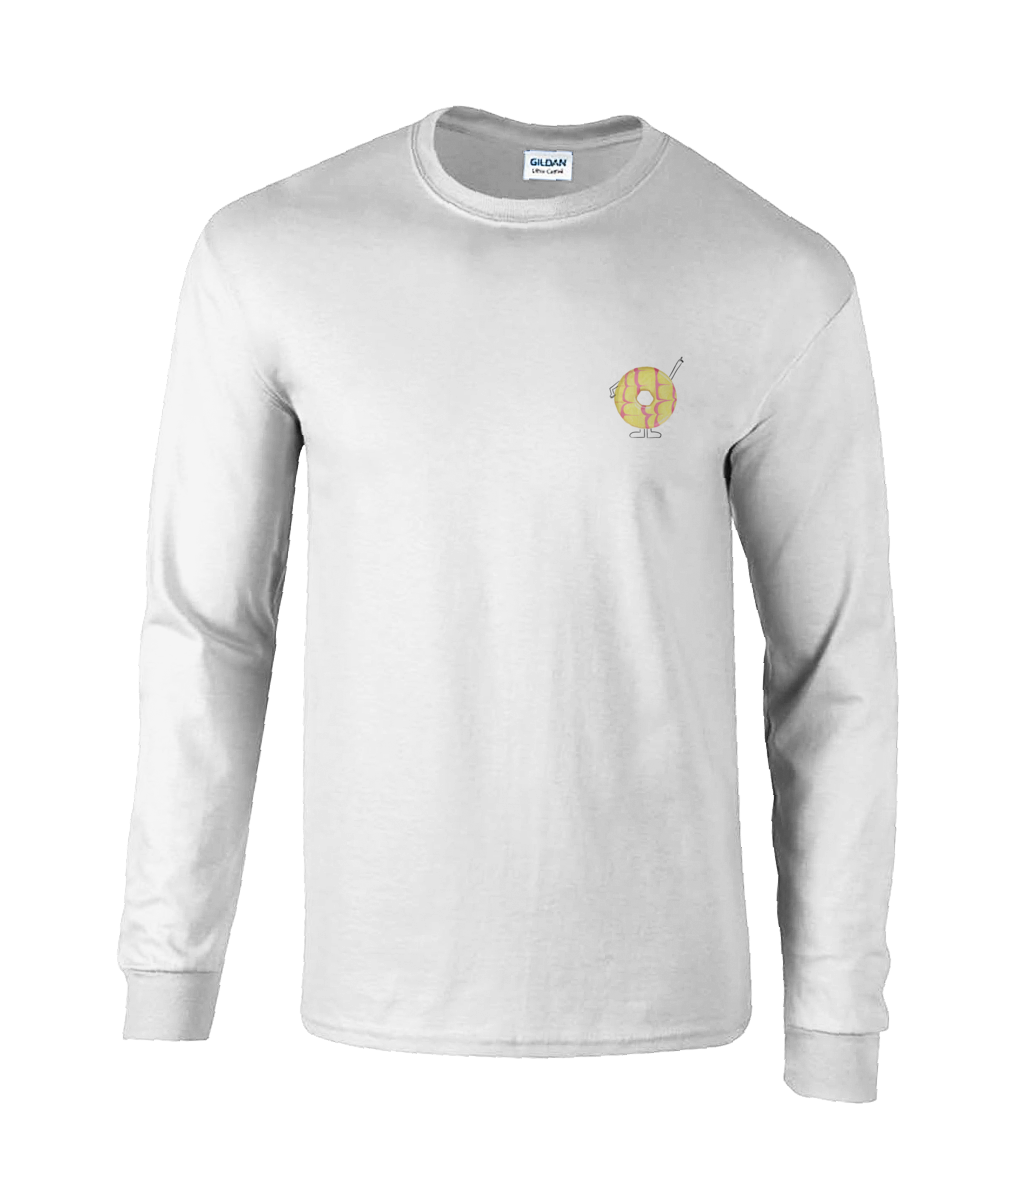 Party Rings Long Sleeve T-Shirt